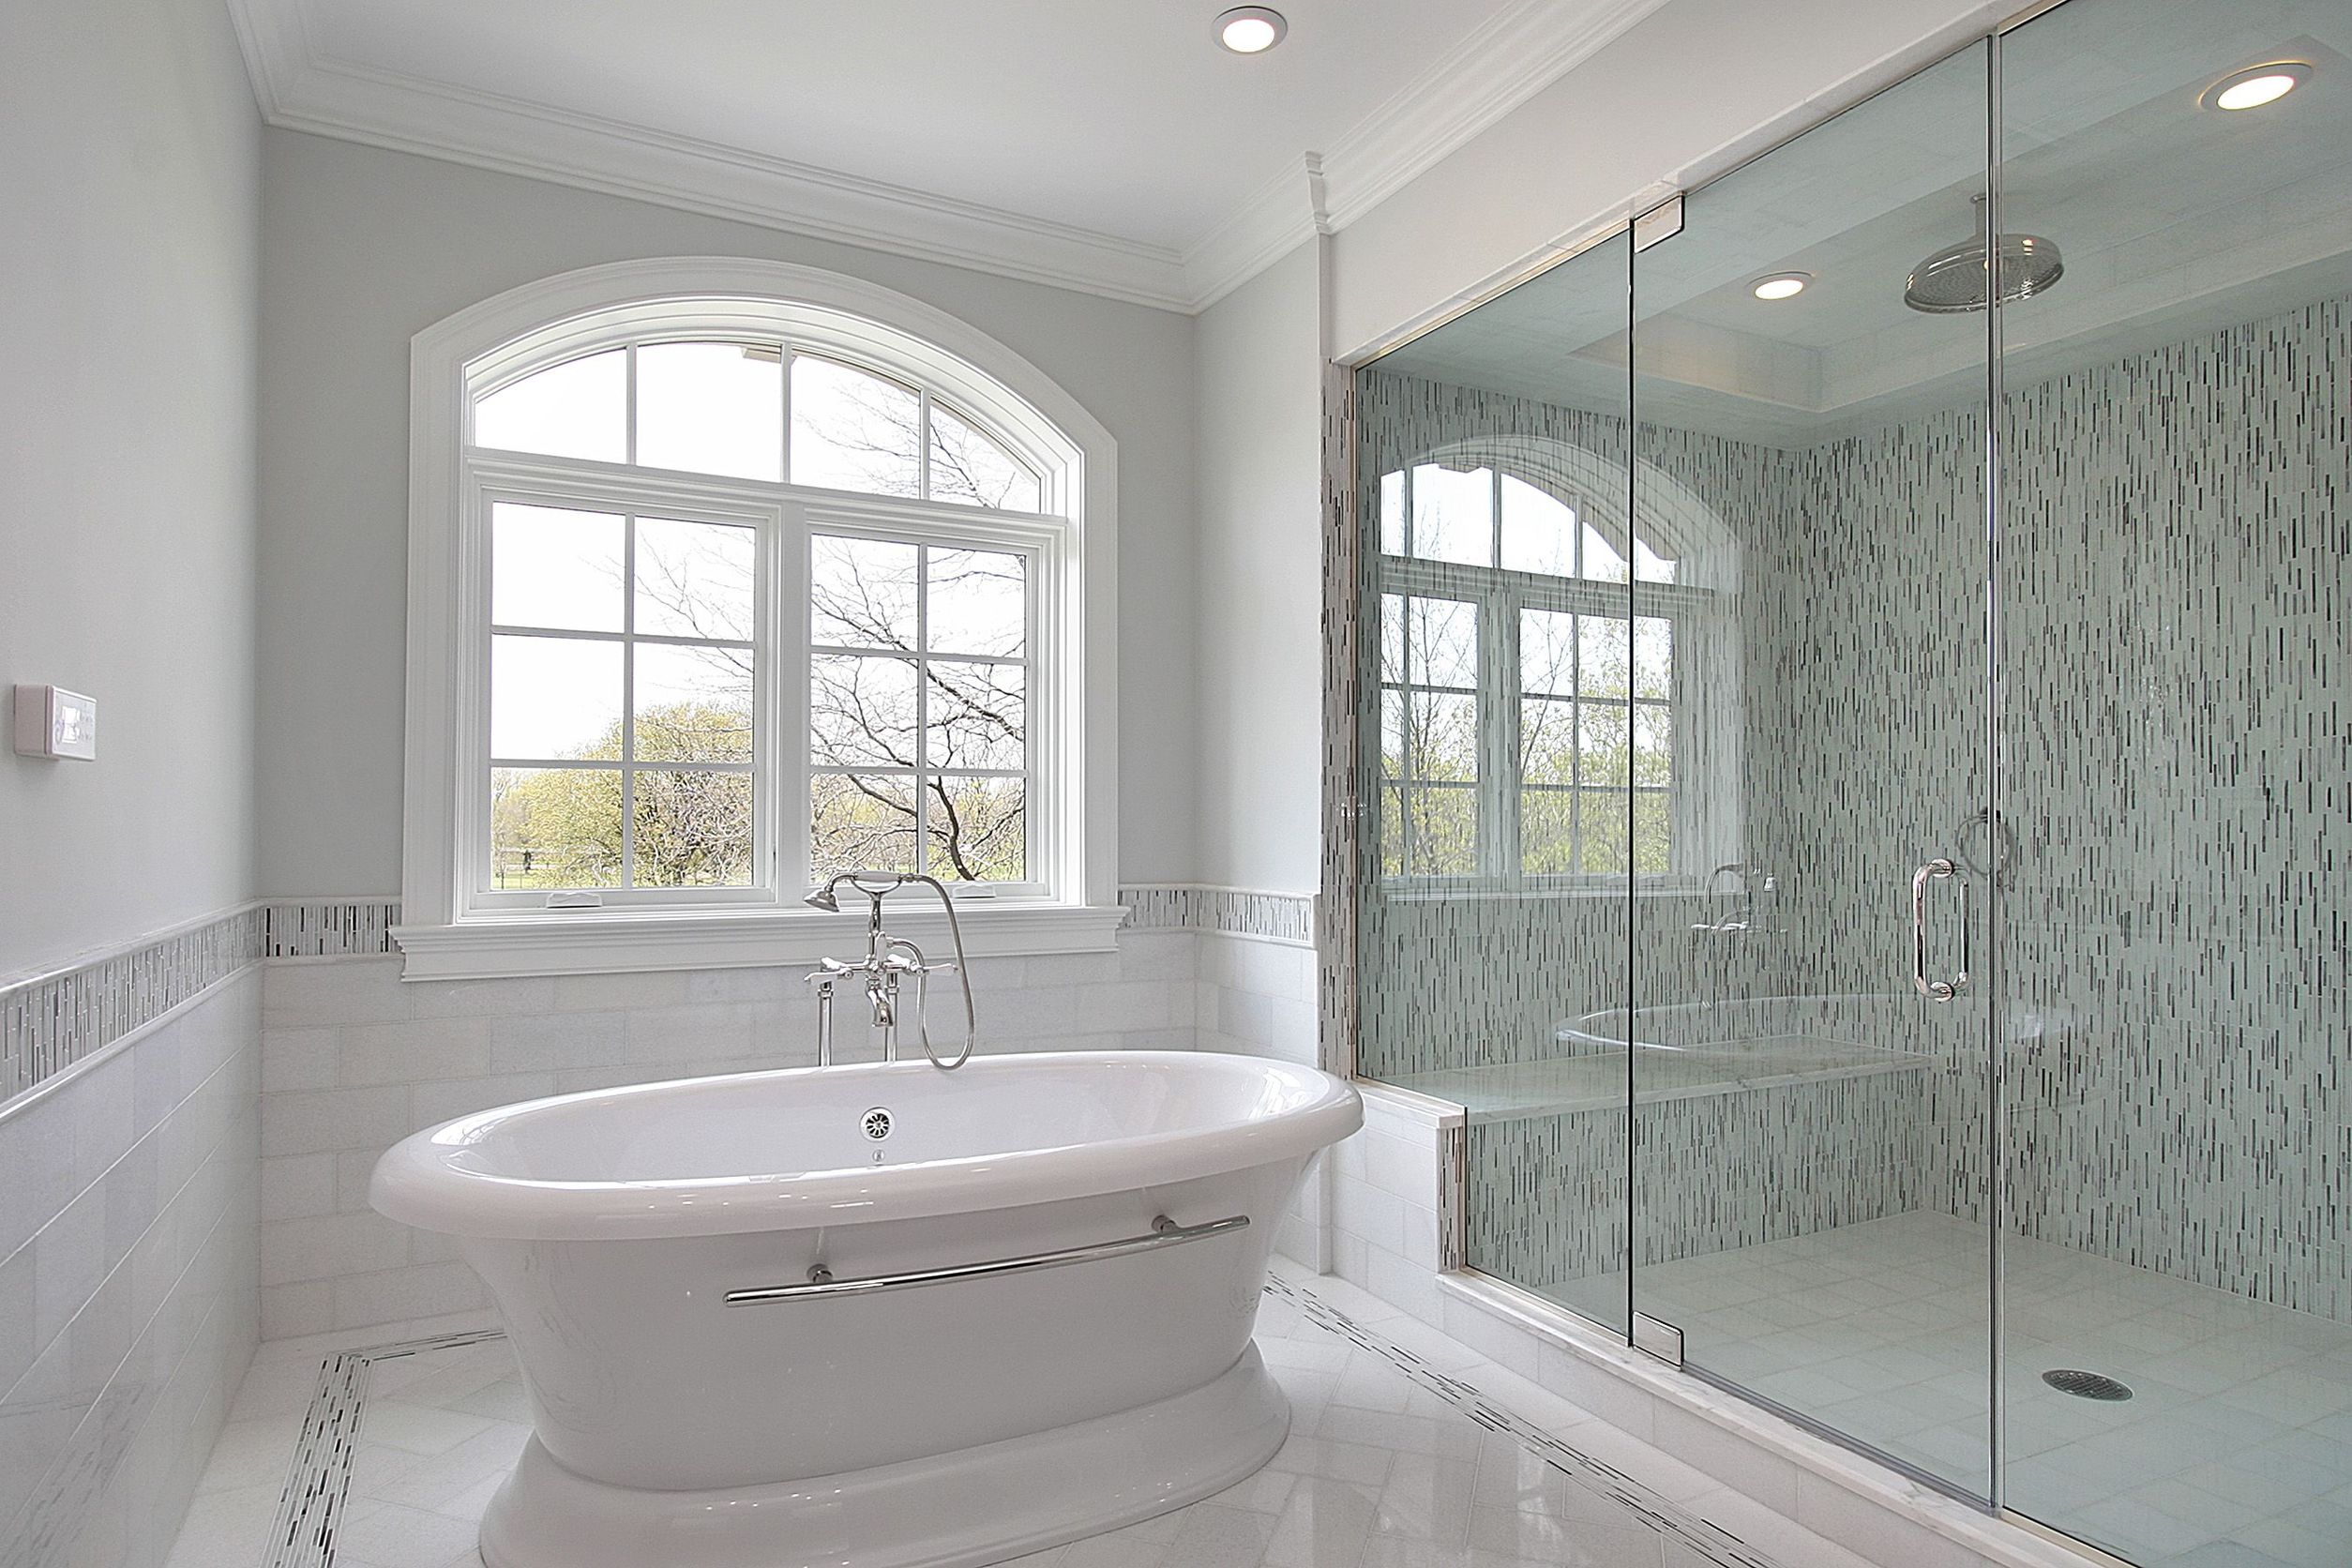 simple layout bathroom remodel with large arched window and white porcelain tub